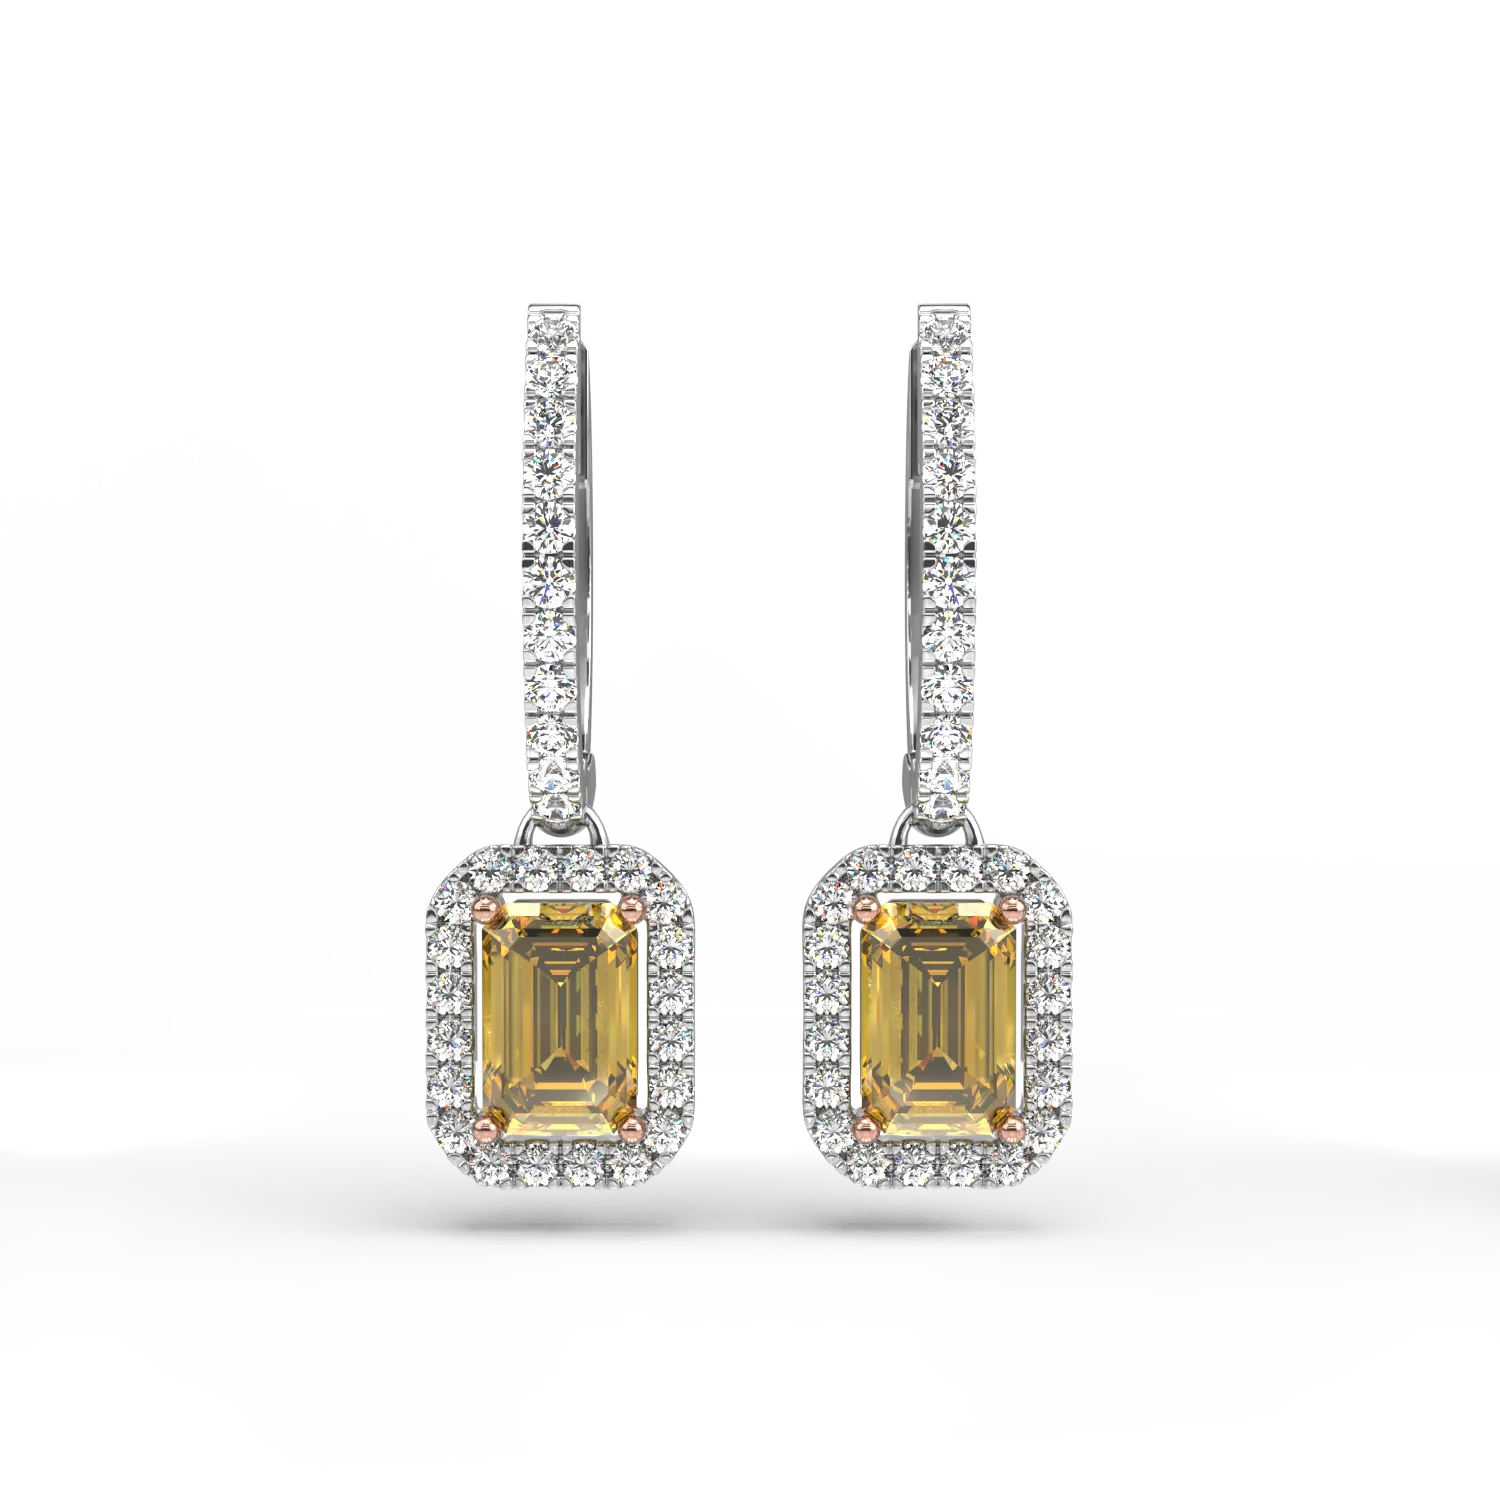 18K white gold earrings with 1.11ct yellow sapphires and 0.37ct diamonds